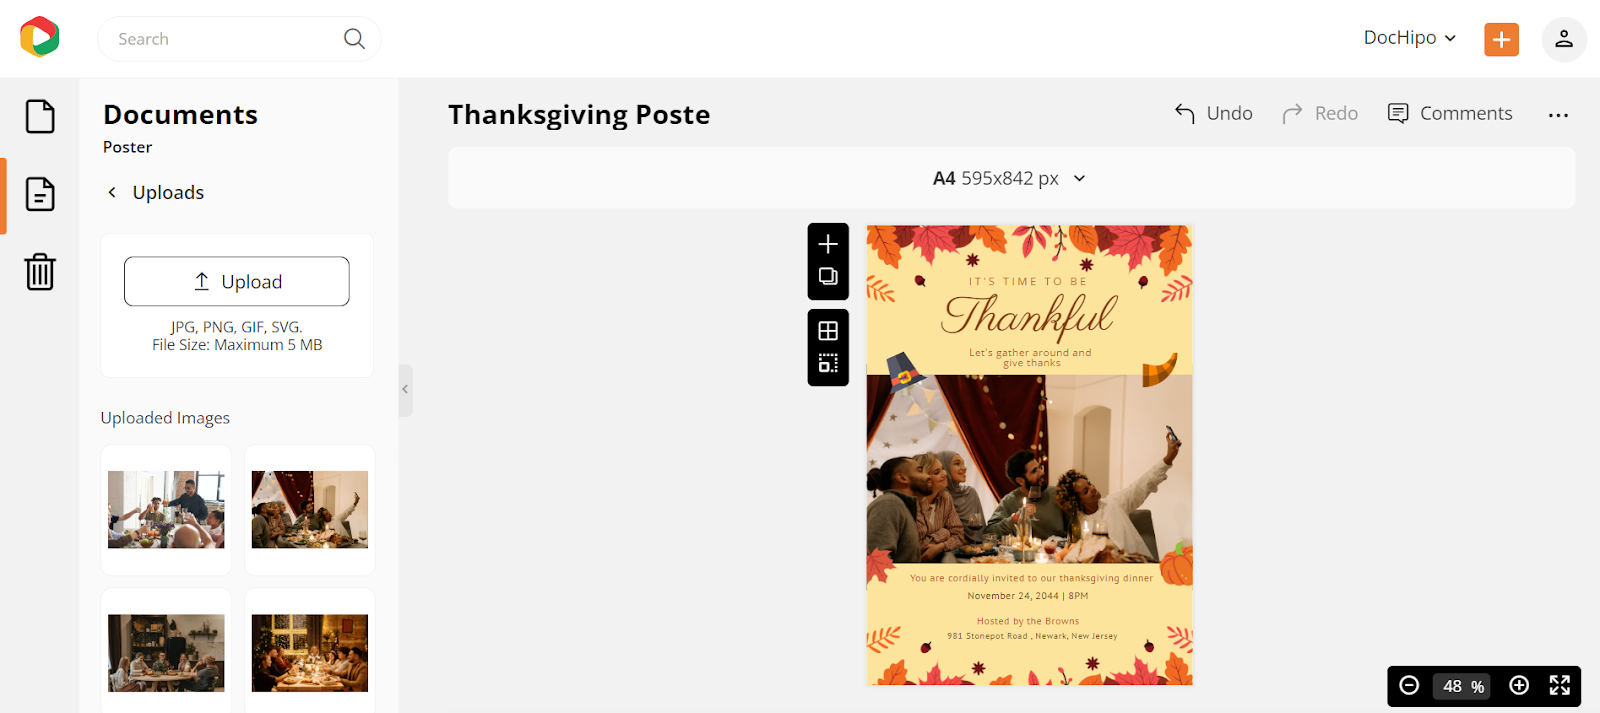 Thanksgiving Poster Design after Repositioning